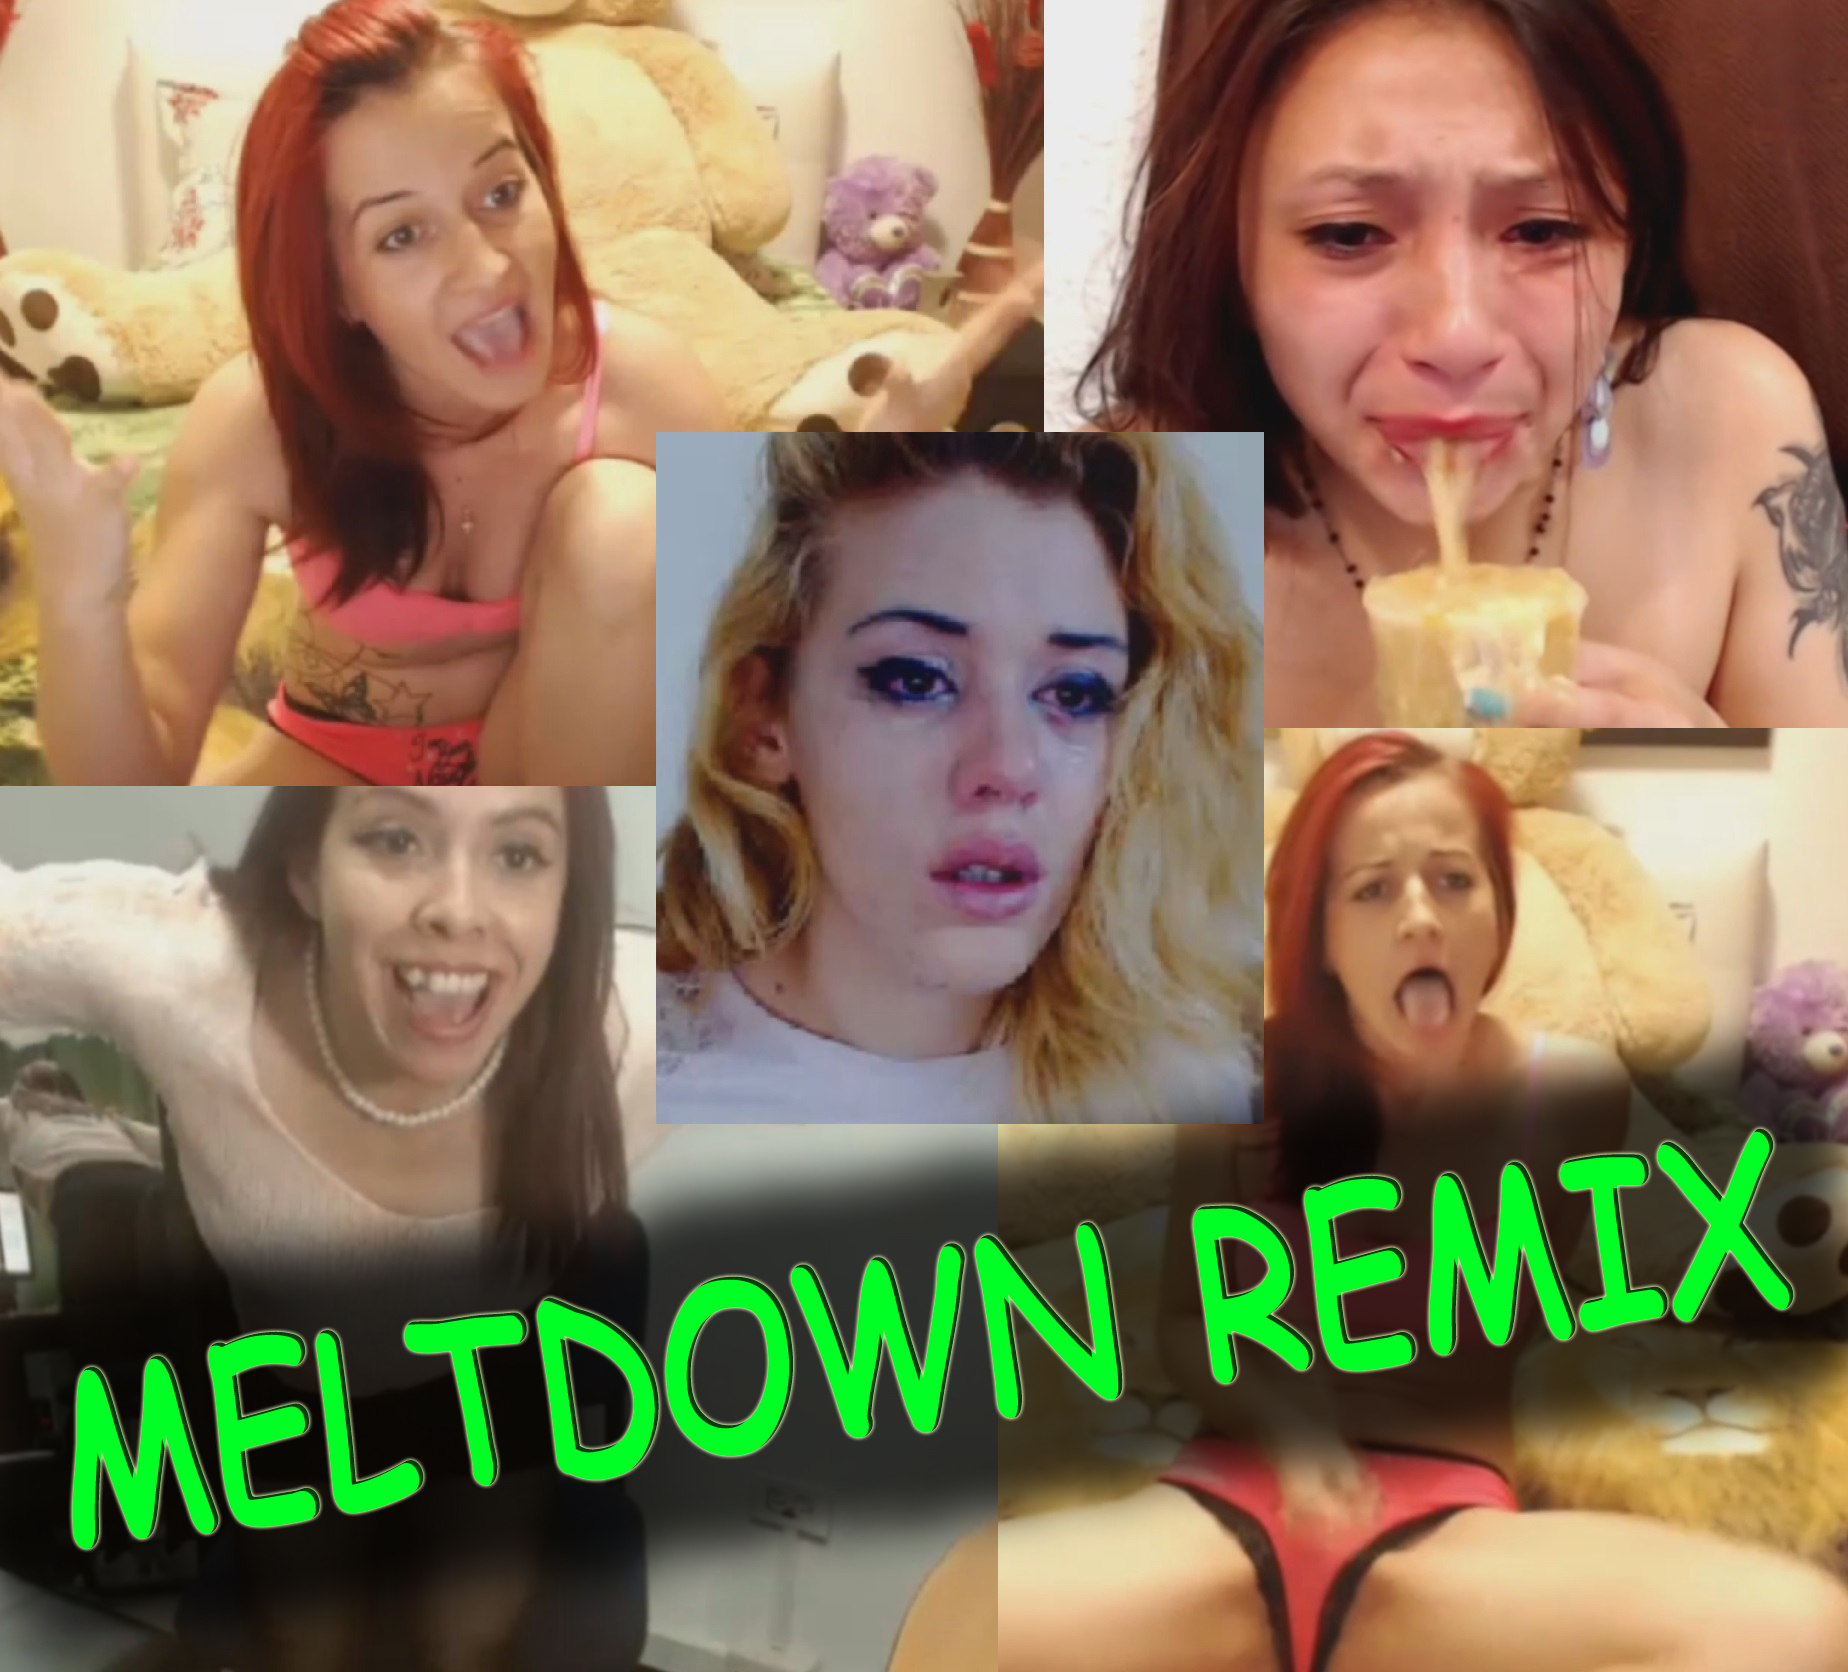 Pourns - Artsy Pourn Presents - Best of Cam Whore Meltdown and Downfalls 2018 -  ThisVid.com